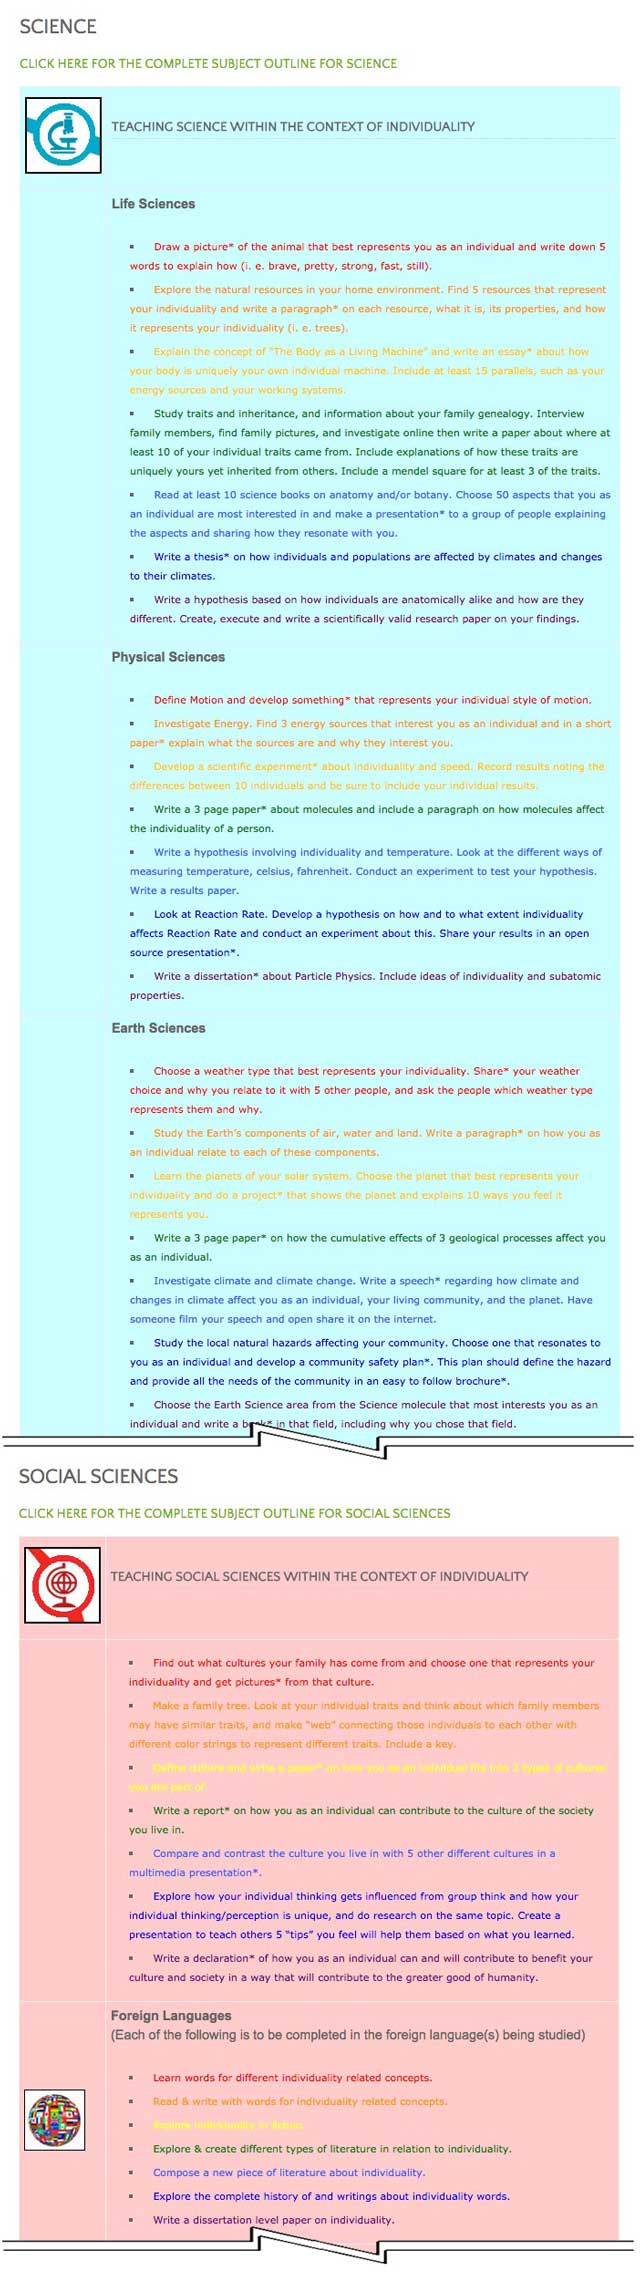 This last week the core team transferred the third 25% of the written content for the Individuality Lesson Plan to the website, as you see here. This lesson plan purposed to teach all subjects, to all learning levels, in any learning environment, using the central theme of “Individuality” is now 75% completed on our website.